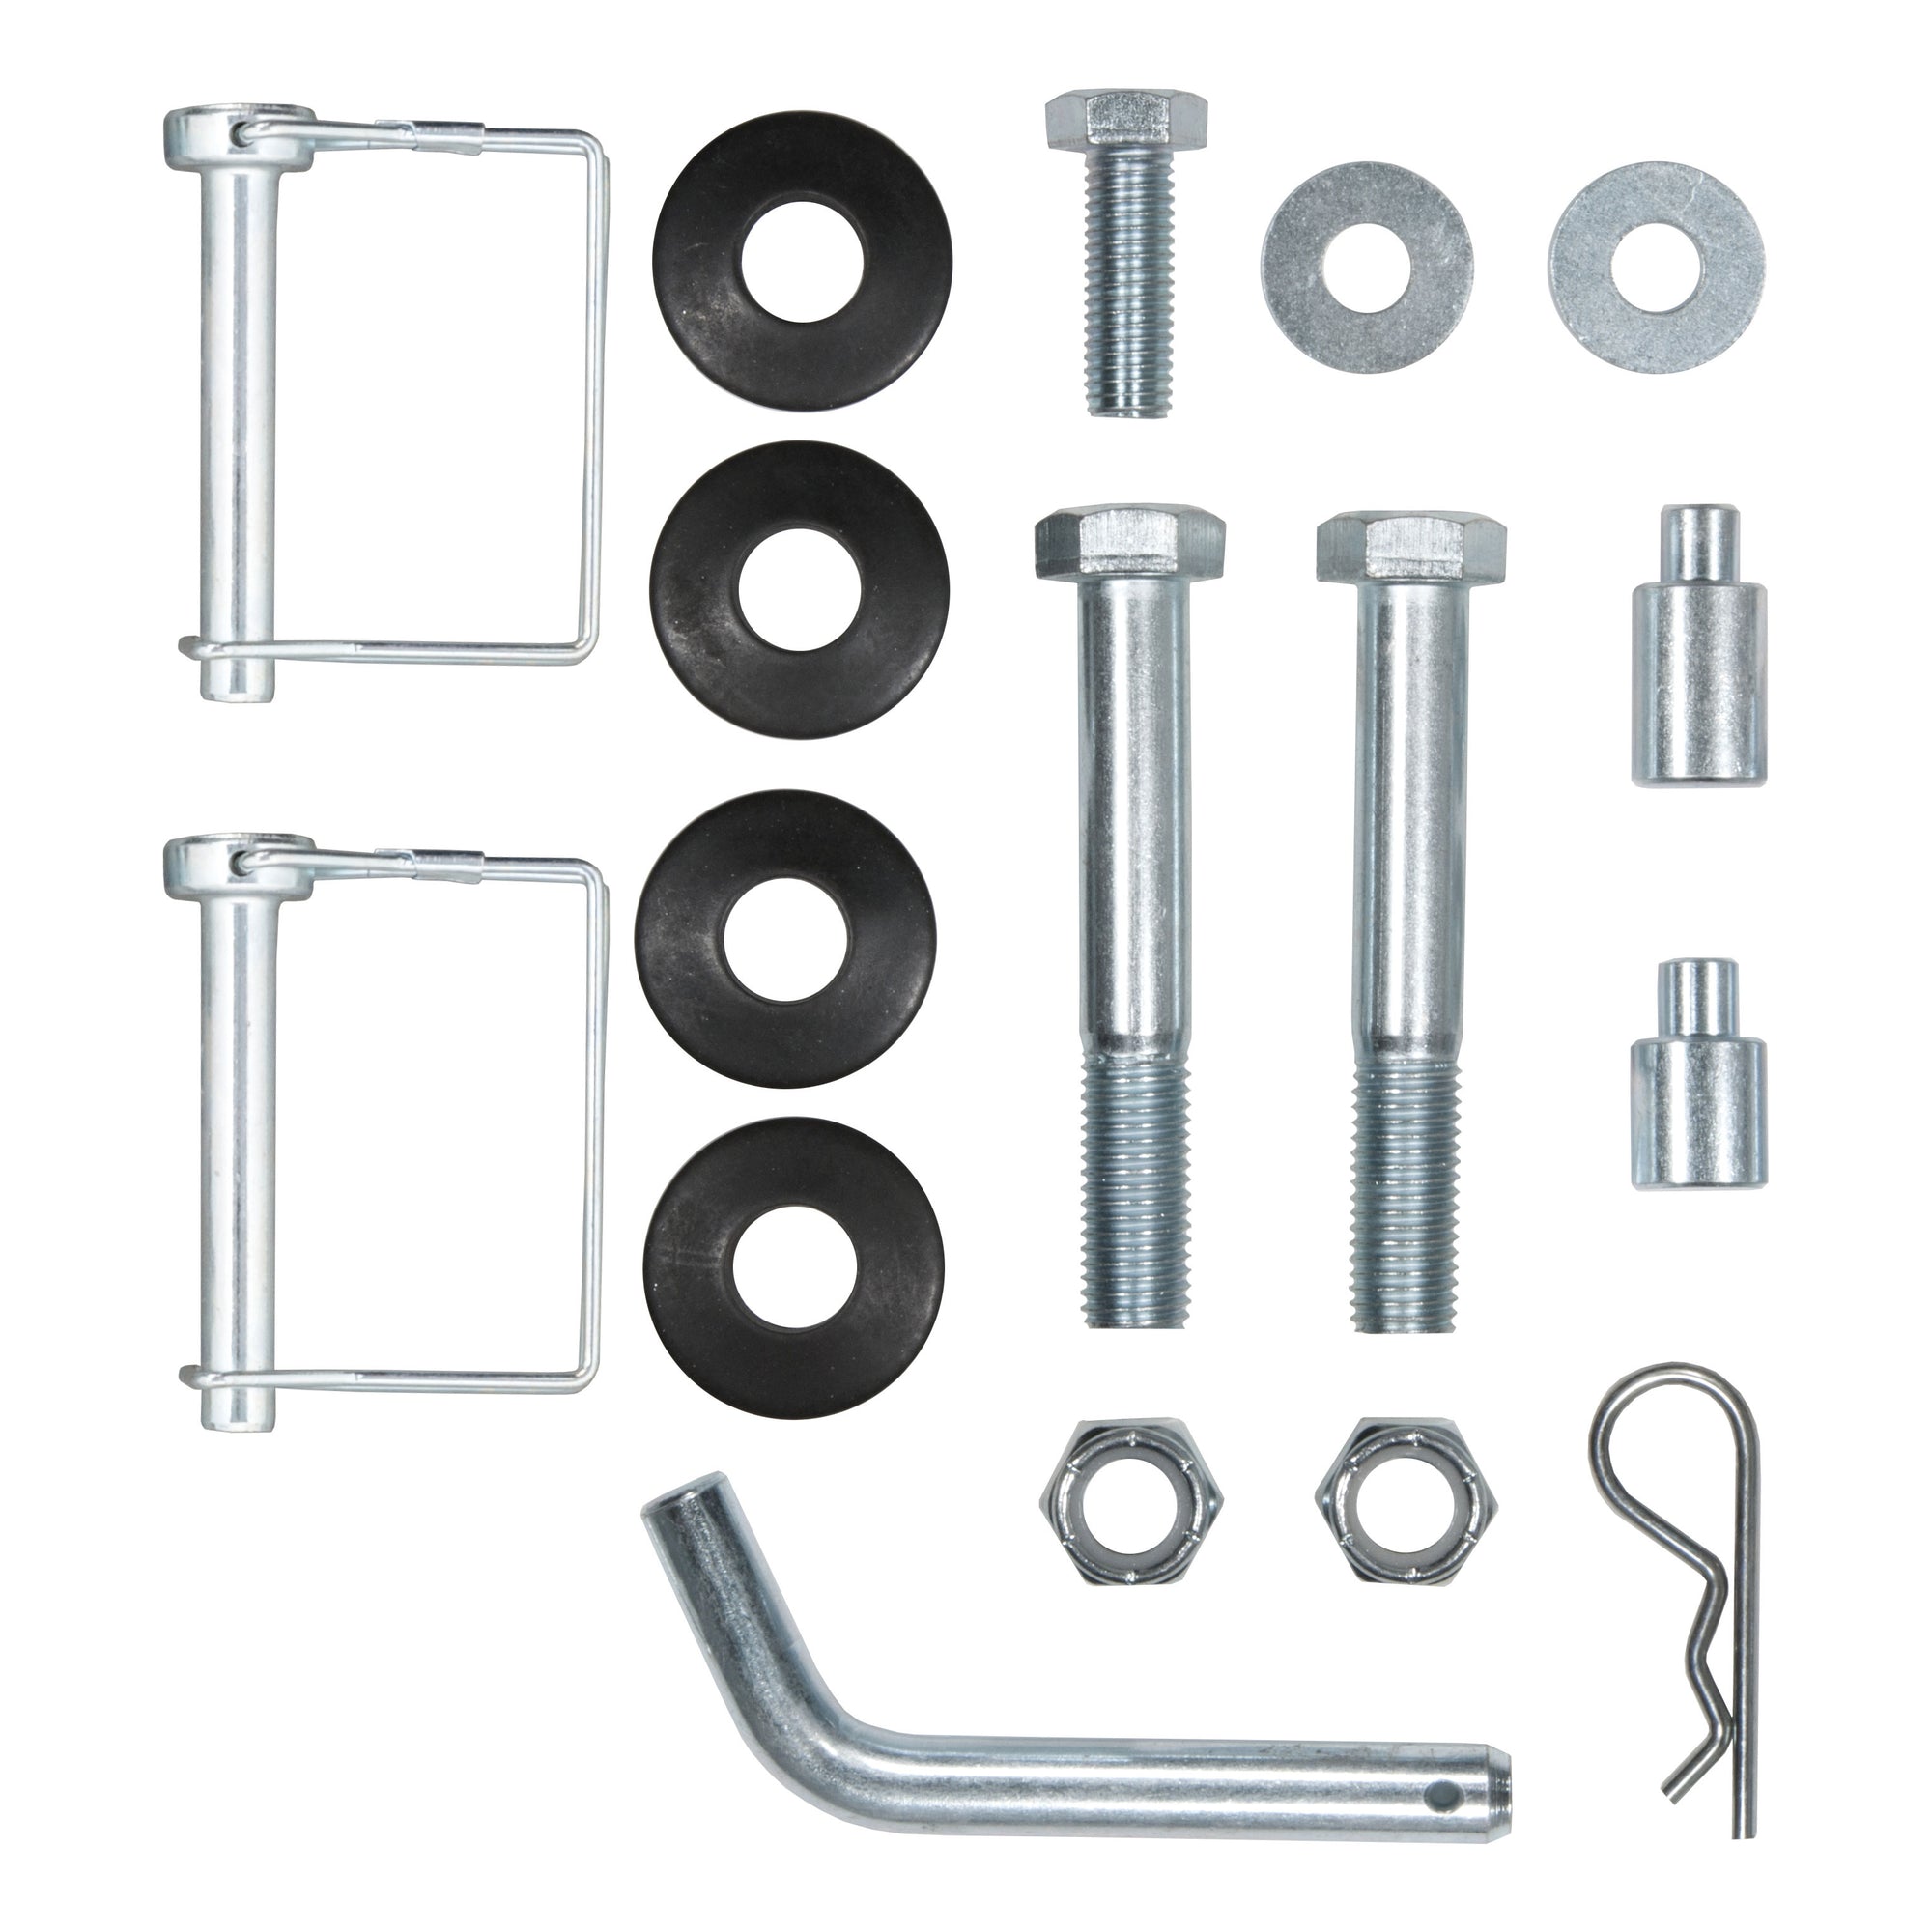 CURT 17554 Replacement TruTrack Weight Distribution Hitch Hardware Kit